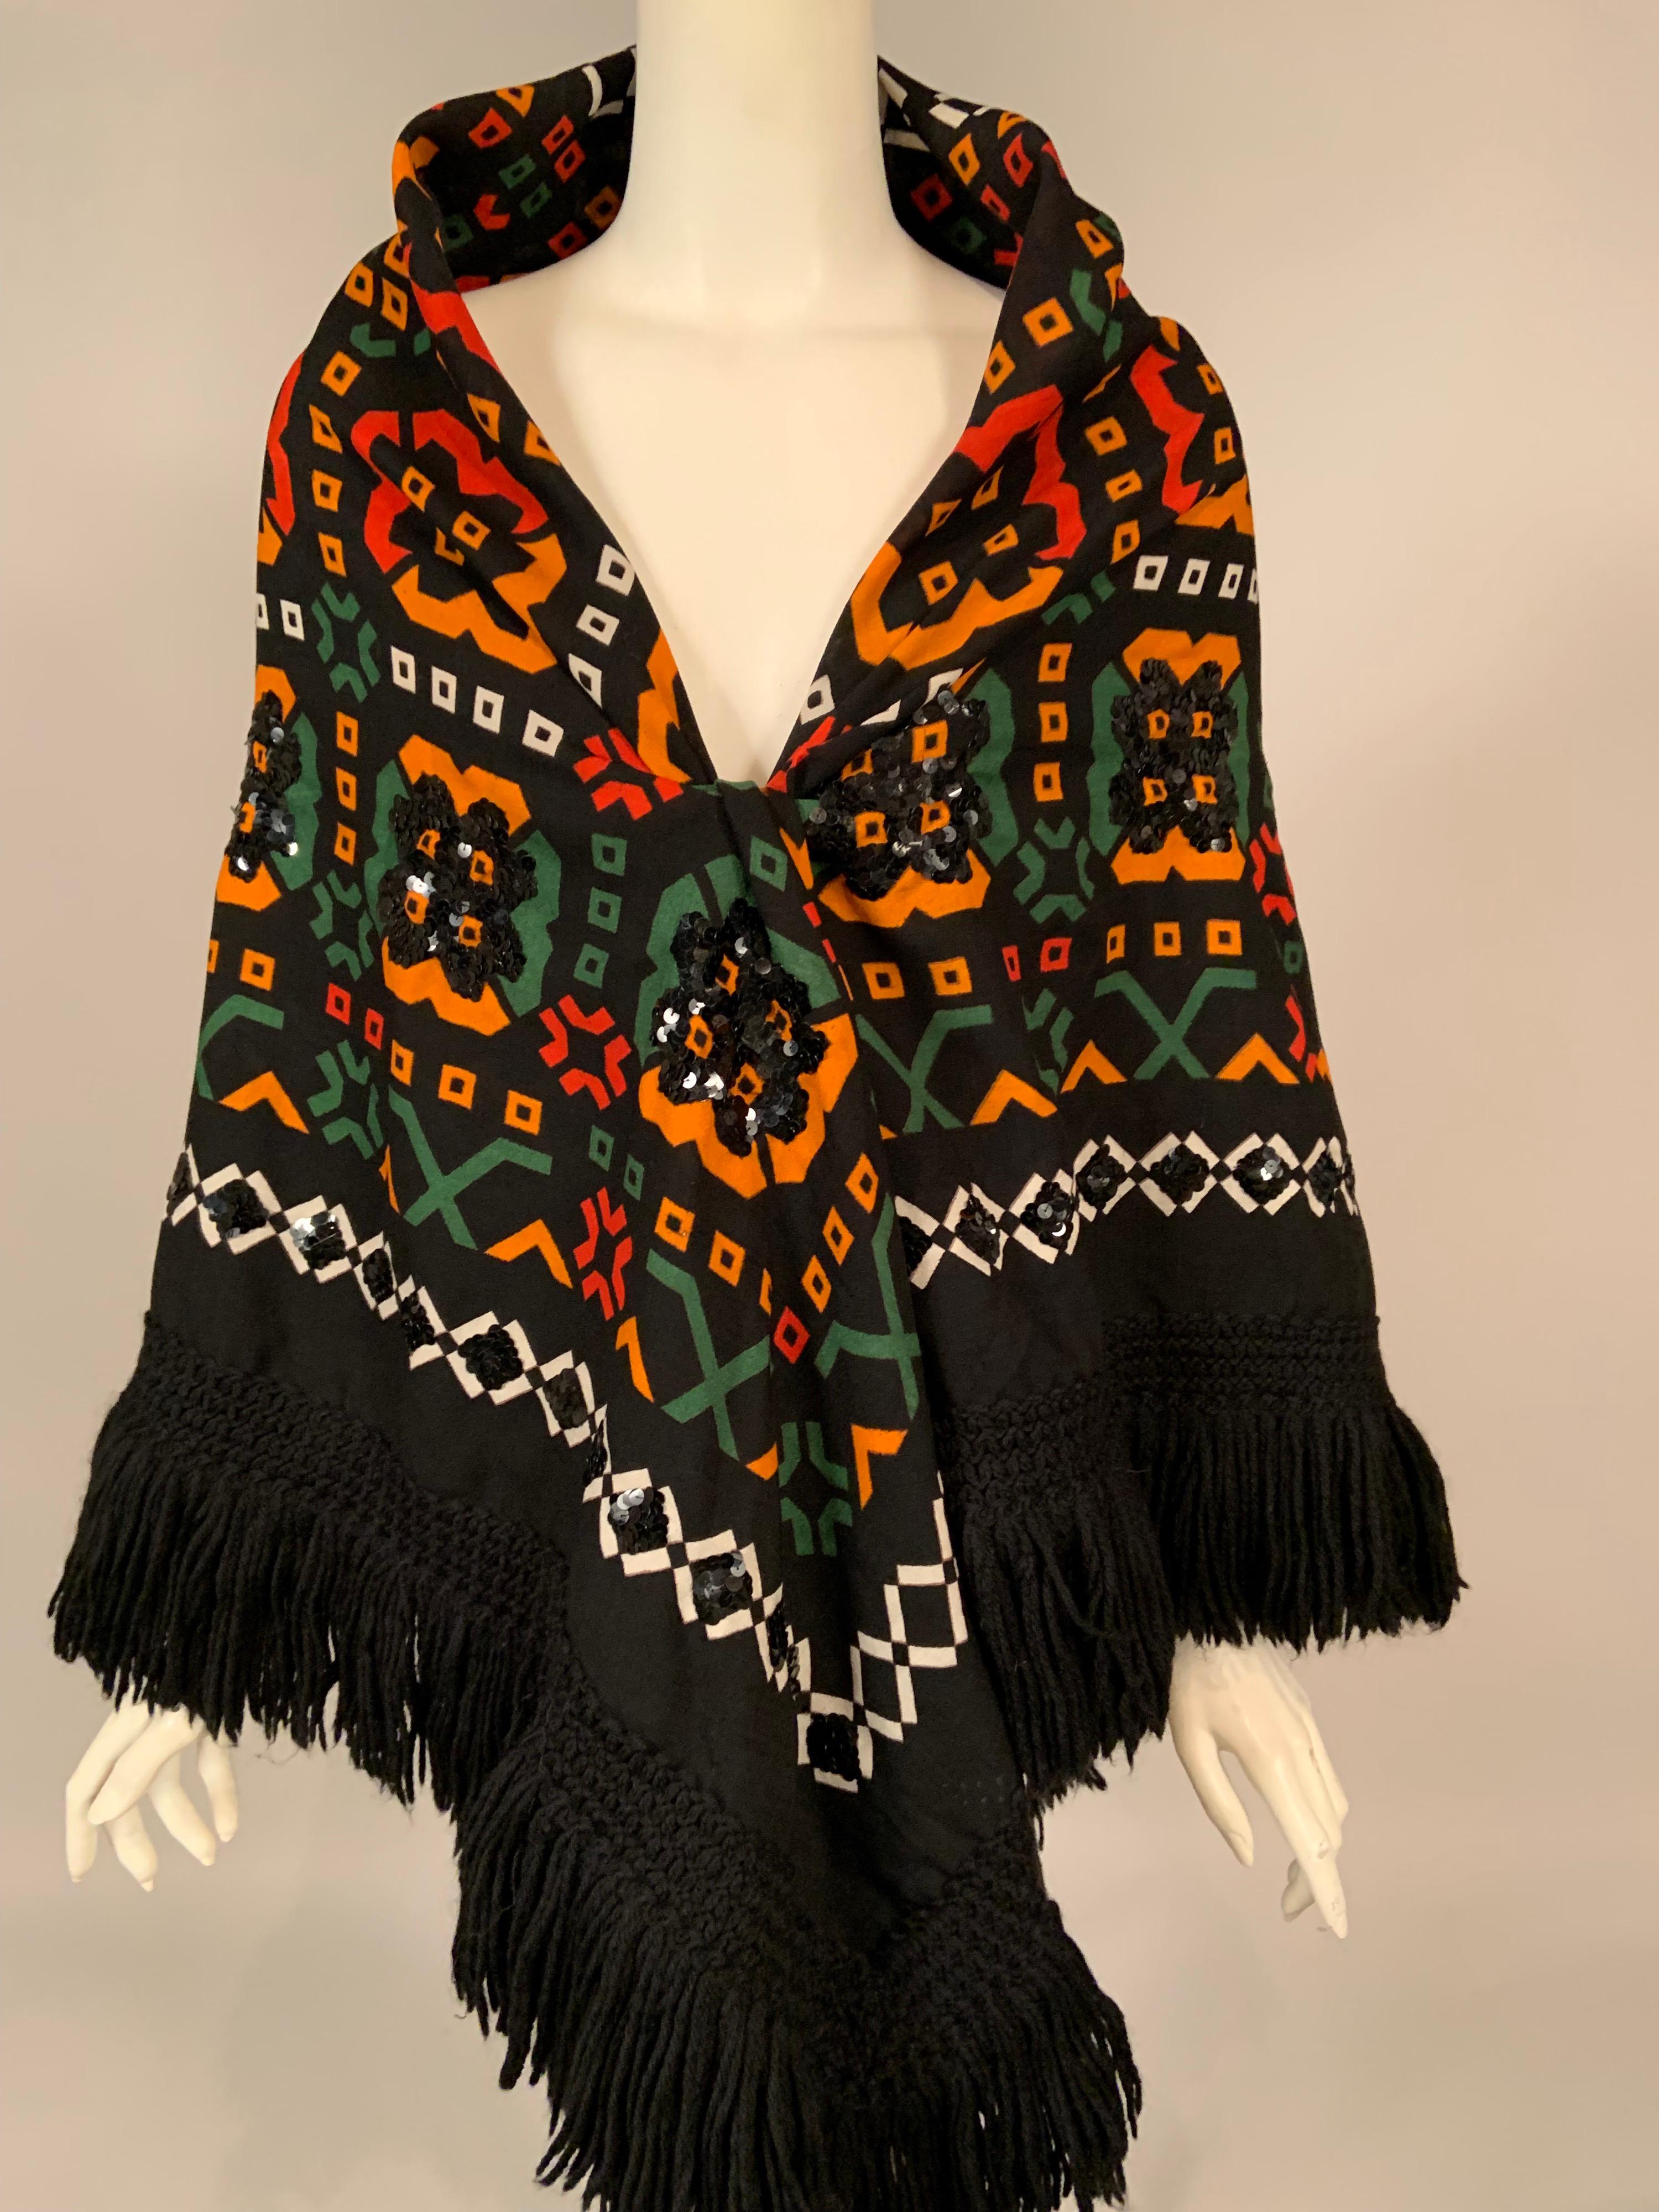 The black wool challis background of this 1970's Lanvin shawl sets off the colorful geometric designs beautifully. There is a white border and contained within this are designs in green, pumpkin, and rust. The shawl has black sequins hand sewn onto